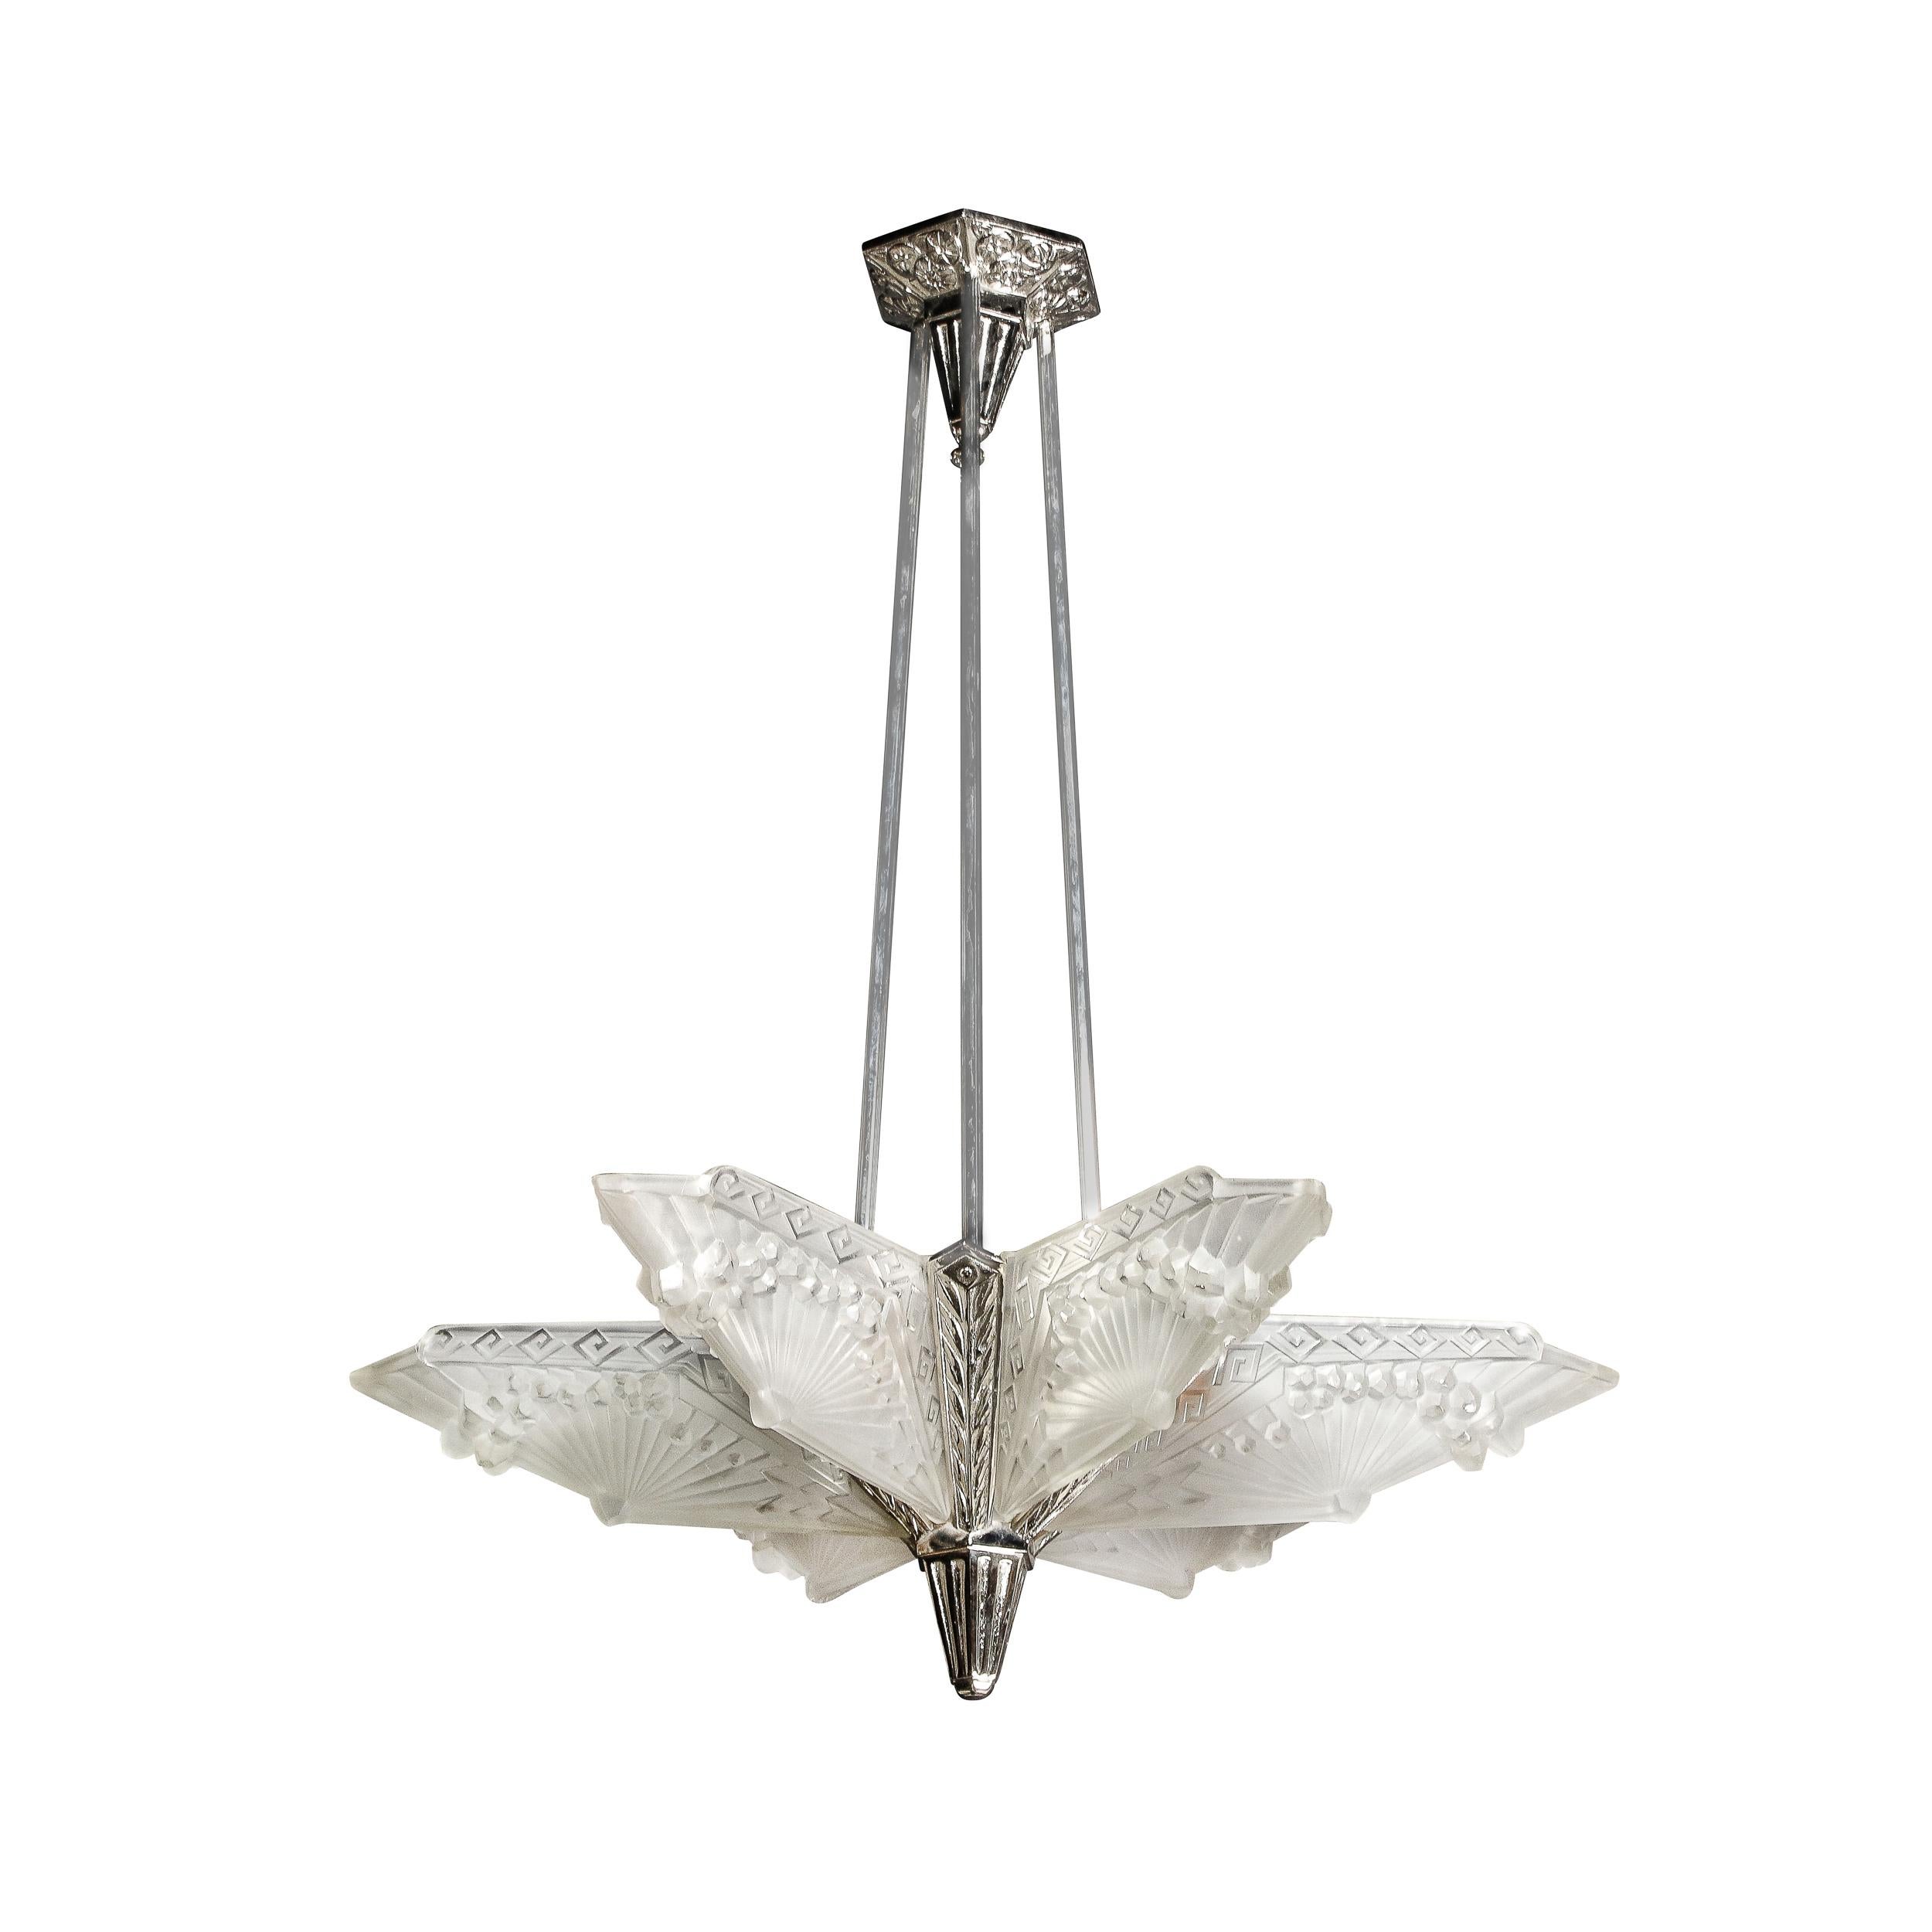 This stunning Art Deco frosted glass and nickel chandelier was realized by the illustrious atelier of Charles Schneider in France circa 1930. The chandelier features a conical channeled finial and a nickeled frame with stylized flame detailing